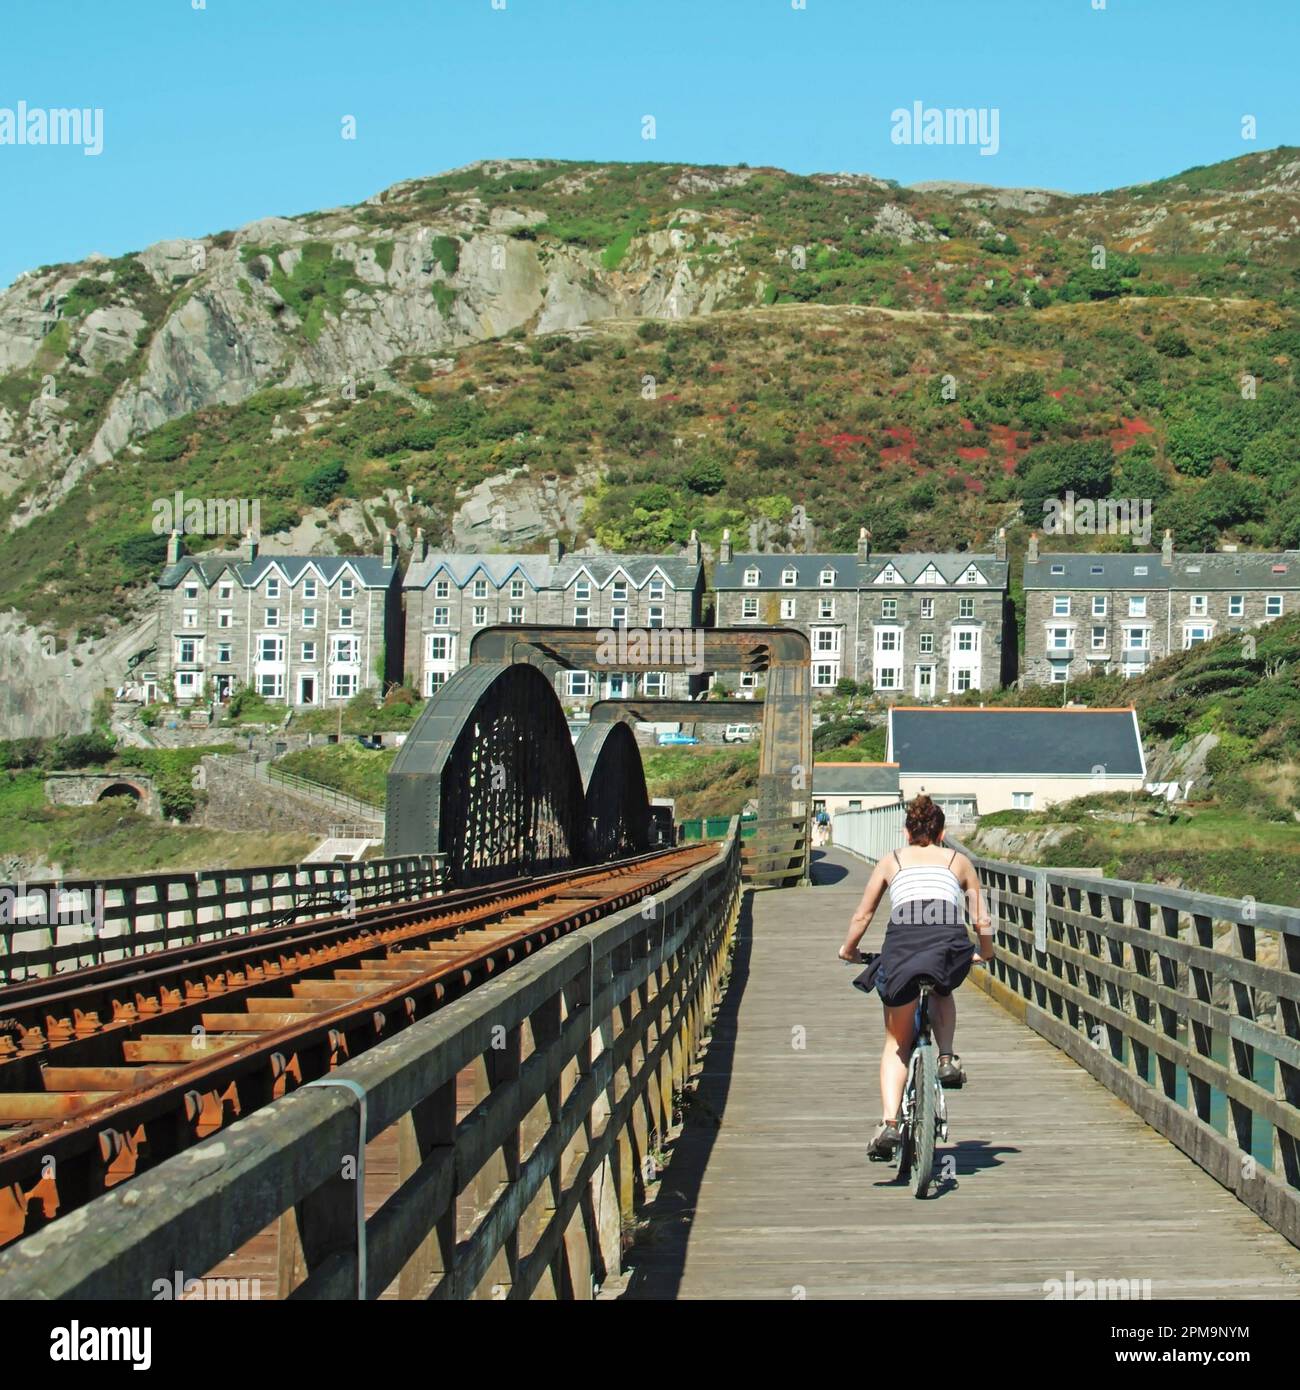 Woman cyclist completes a bike ride journey beside the historical Victorian Barmouth Bridge (or Pont Abermaw) or (Barmouth Viaduct) which is a Grade II listed single track wooden railway structure. Parallel to the train track is this footbridge walkway & both cross the estuary of the Afon Mawddach River linking Barmouth here here to Morfa Mawddach a small station 820 metres  away both in Gwynedd in North Wales. The footbridge is part of the National Cycle Route 8 & is available to pedestrians cyclists and motorbike users. Stock Photo